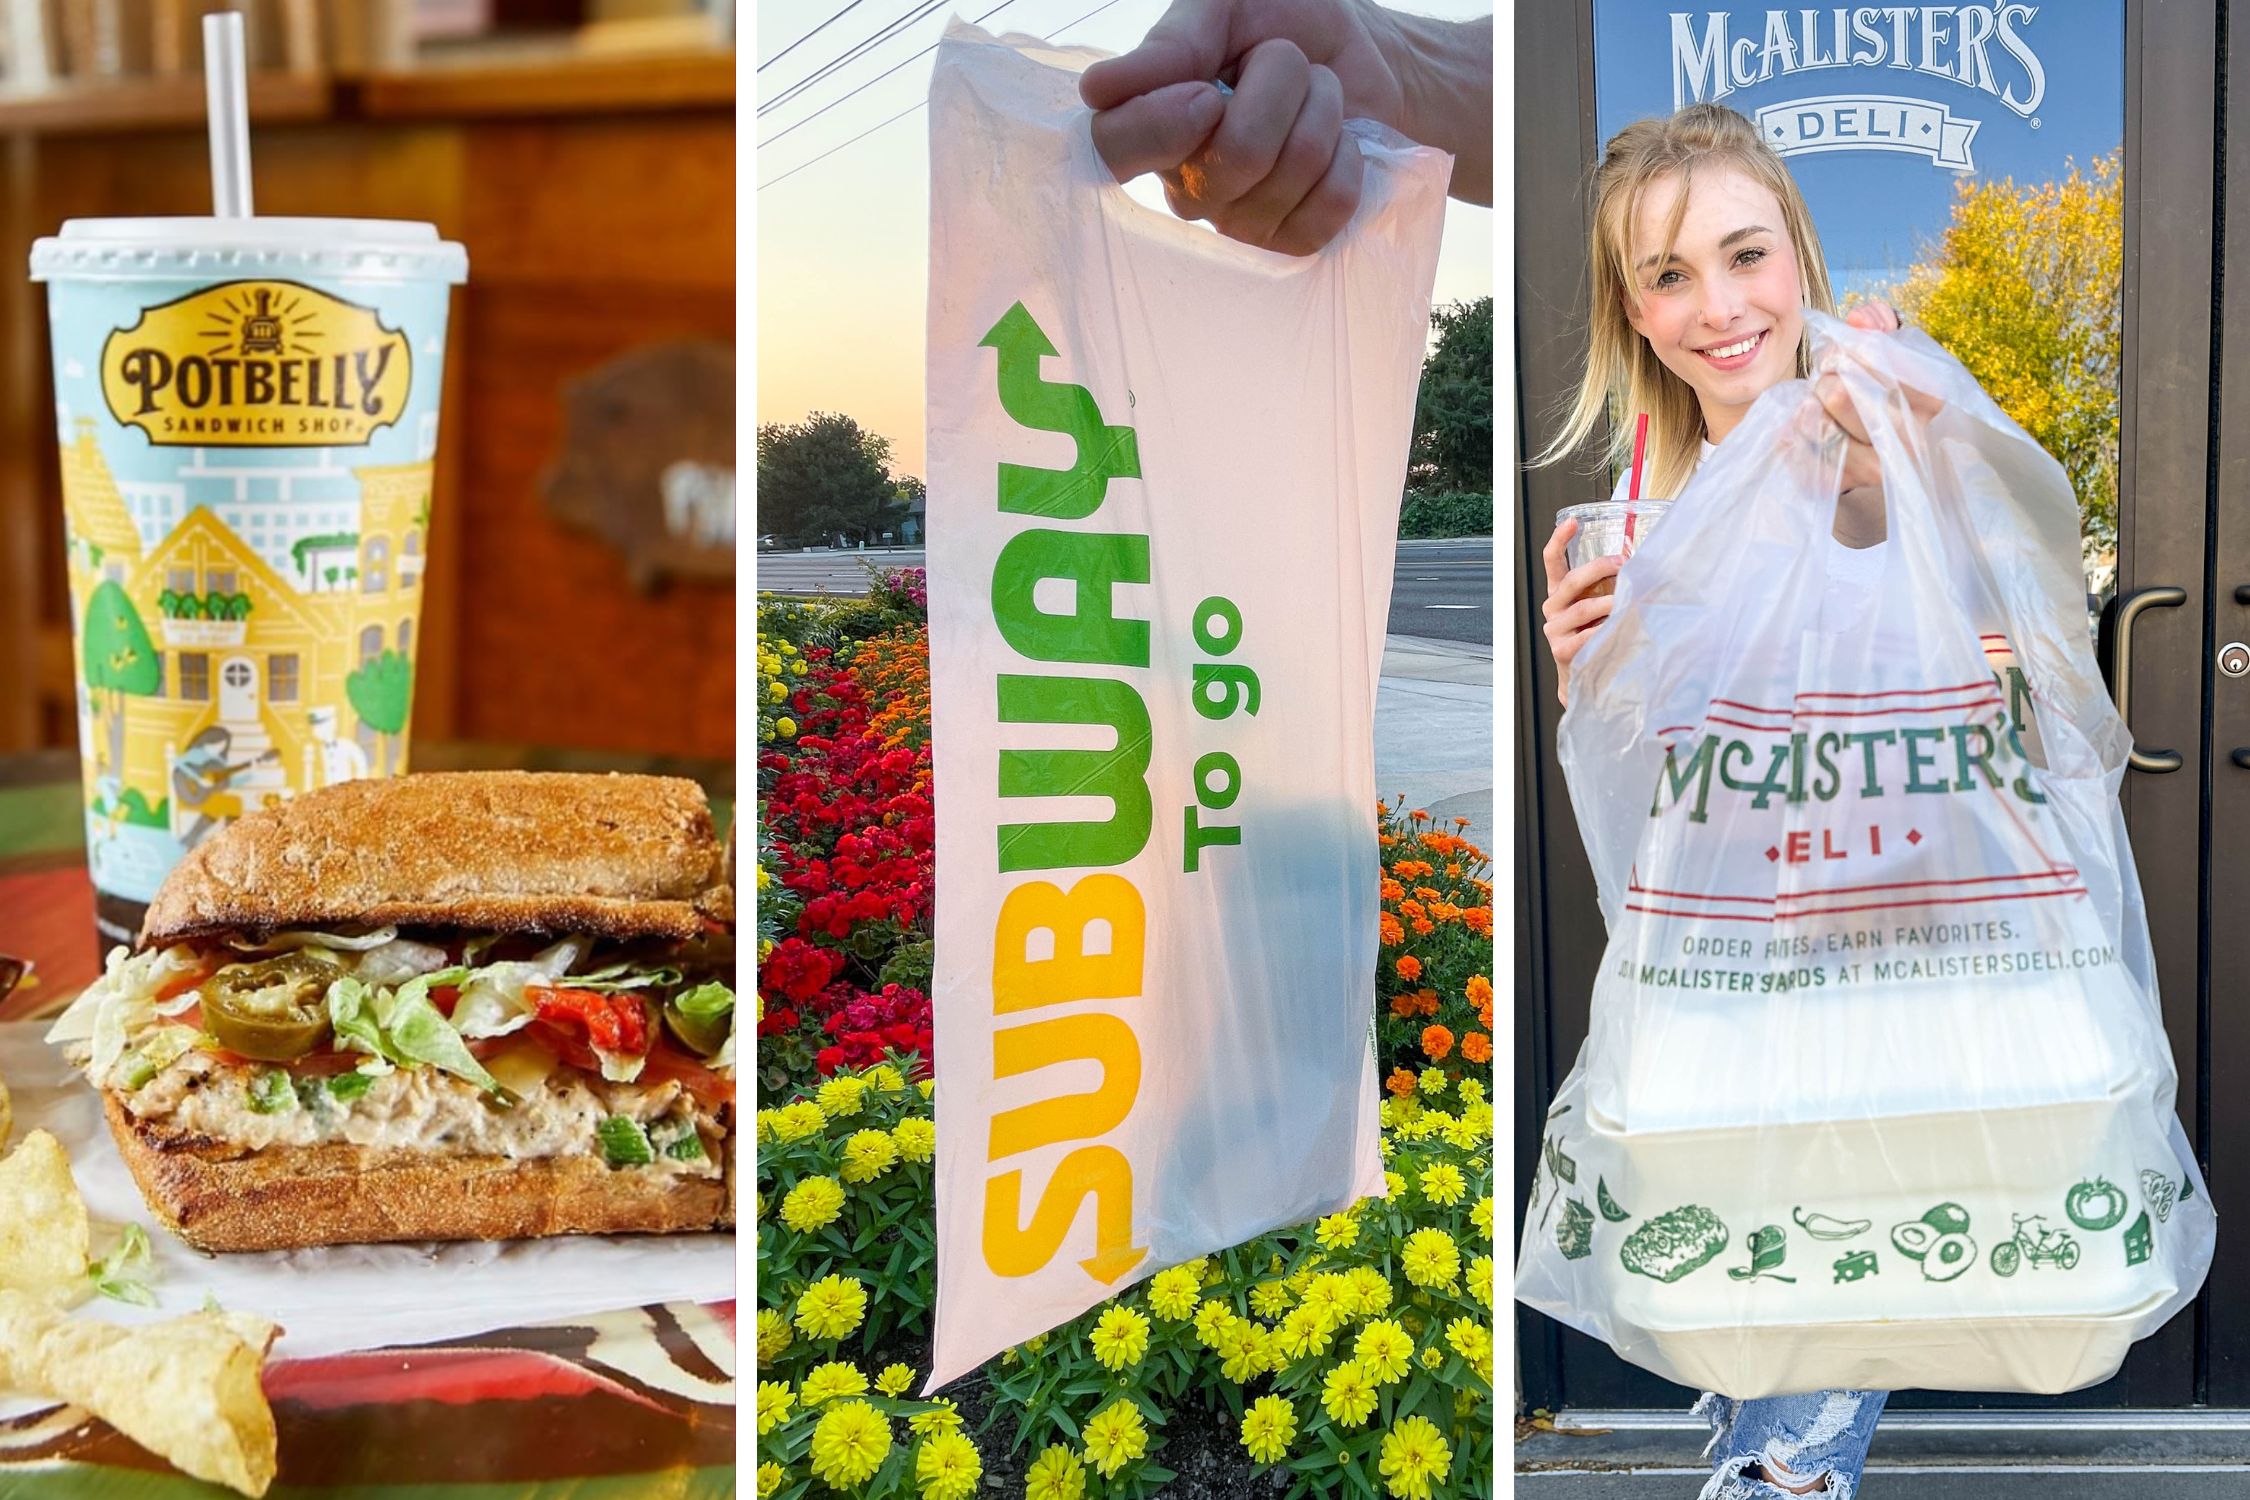 SPONSORED: Save, Save, Save, With These Awesome Subway Coupons! 